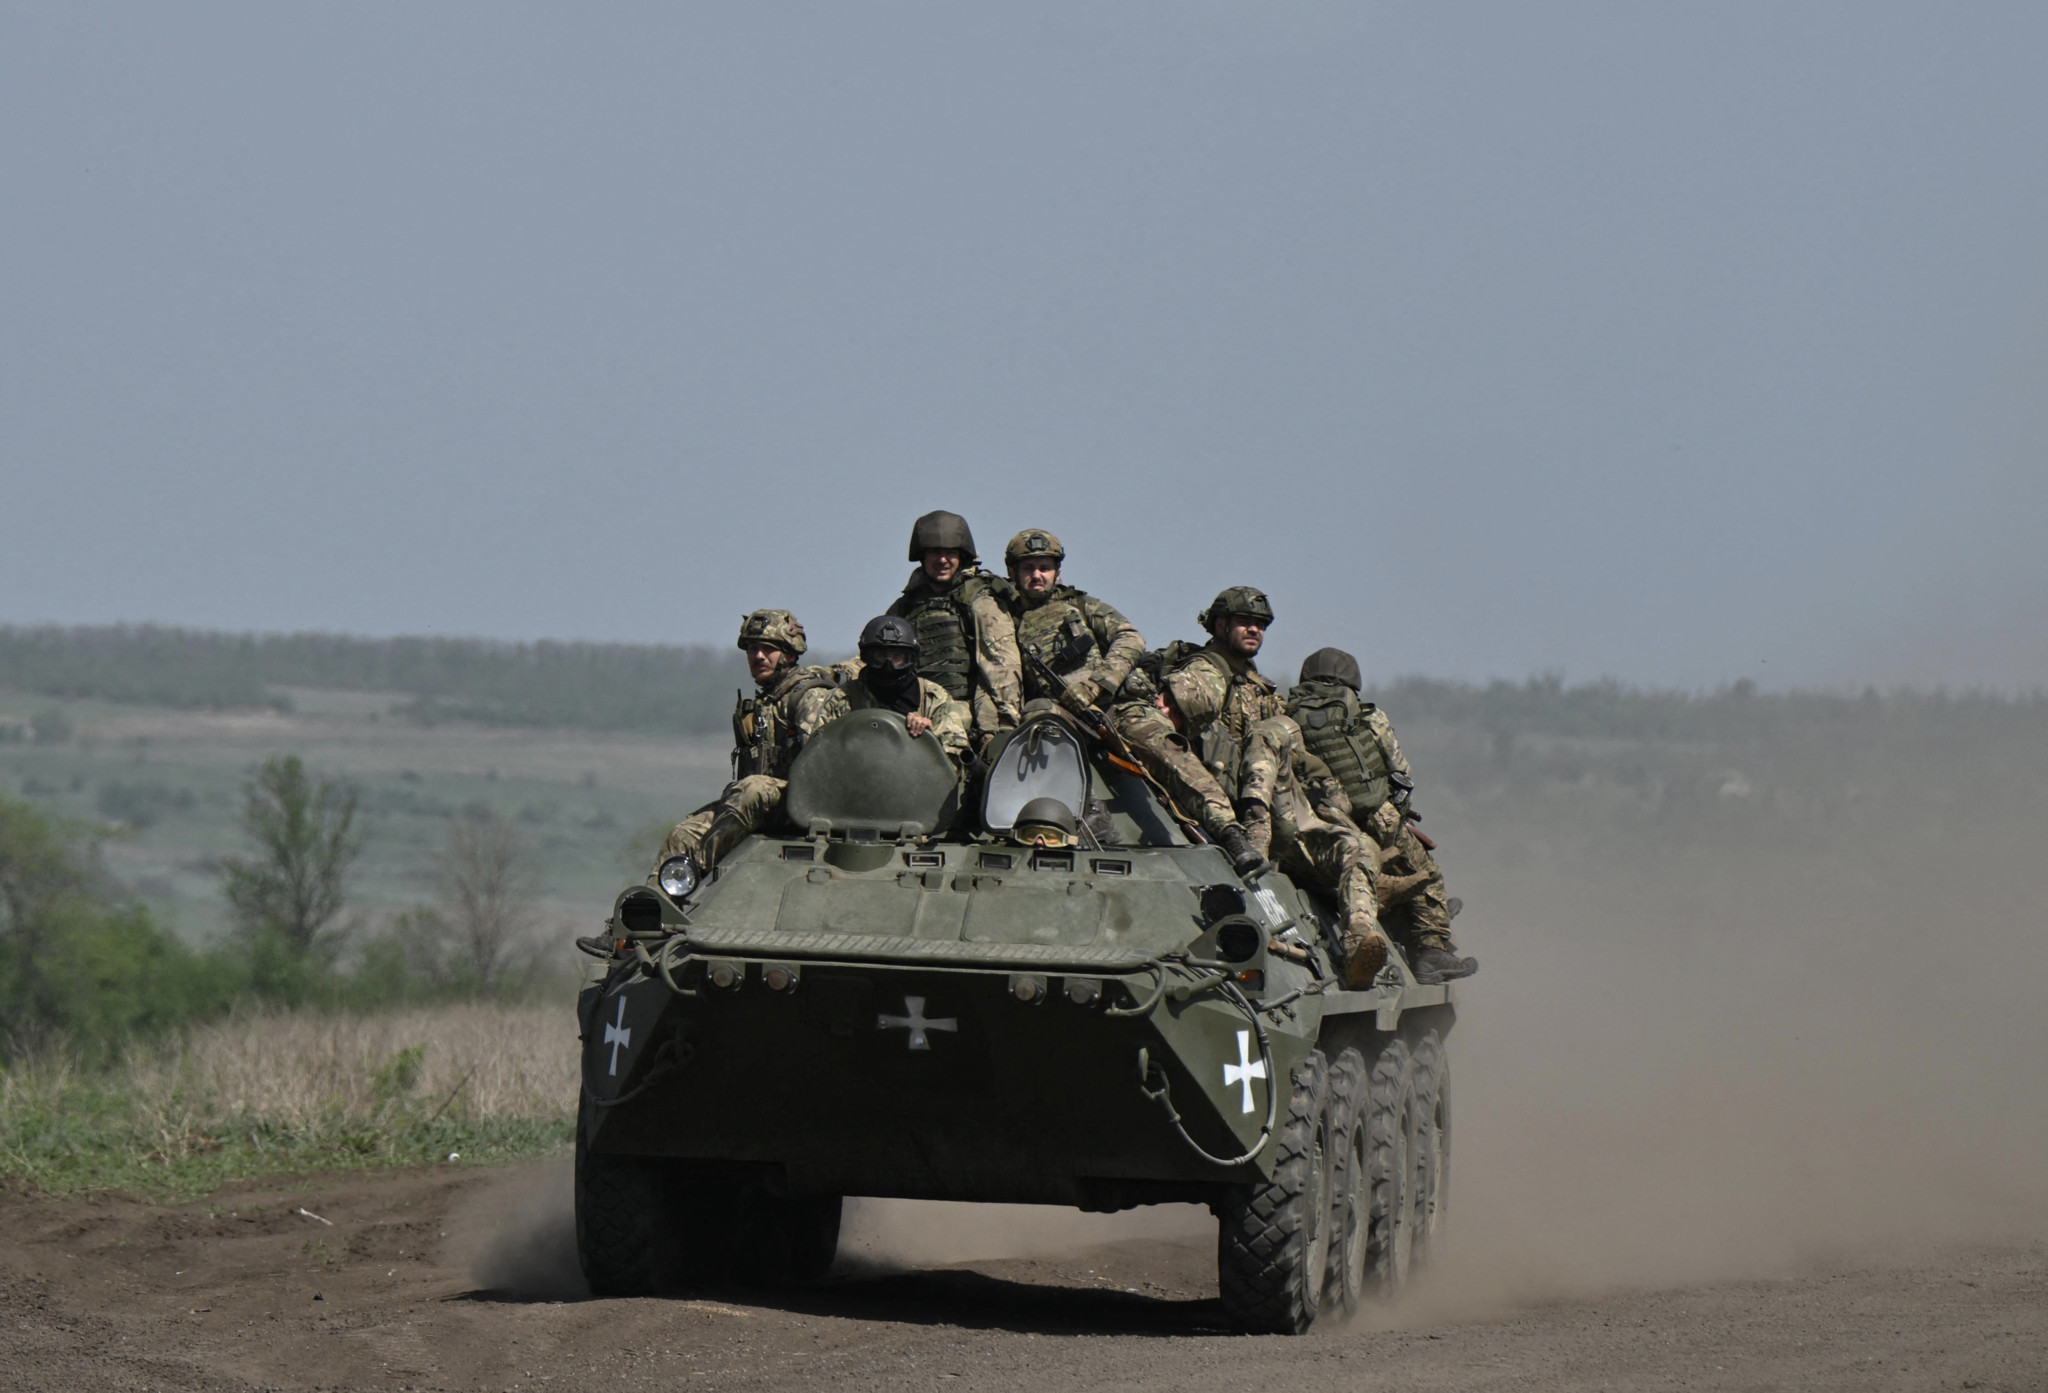 Ukrainian servicemen ride on an armored personnel carrier  (APC) in a field near Chasiv Yar, Donetsk region, on April 27, 2024, amid the Russian invasion of Ukraine. (Photo by Genya SAVILOV / AFP)